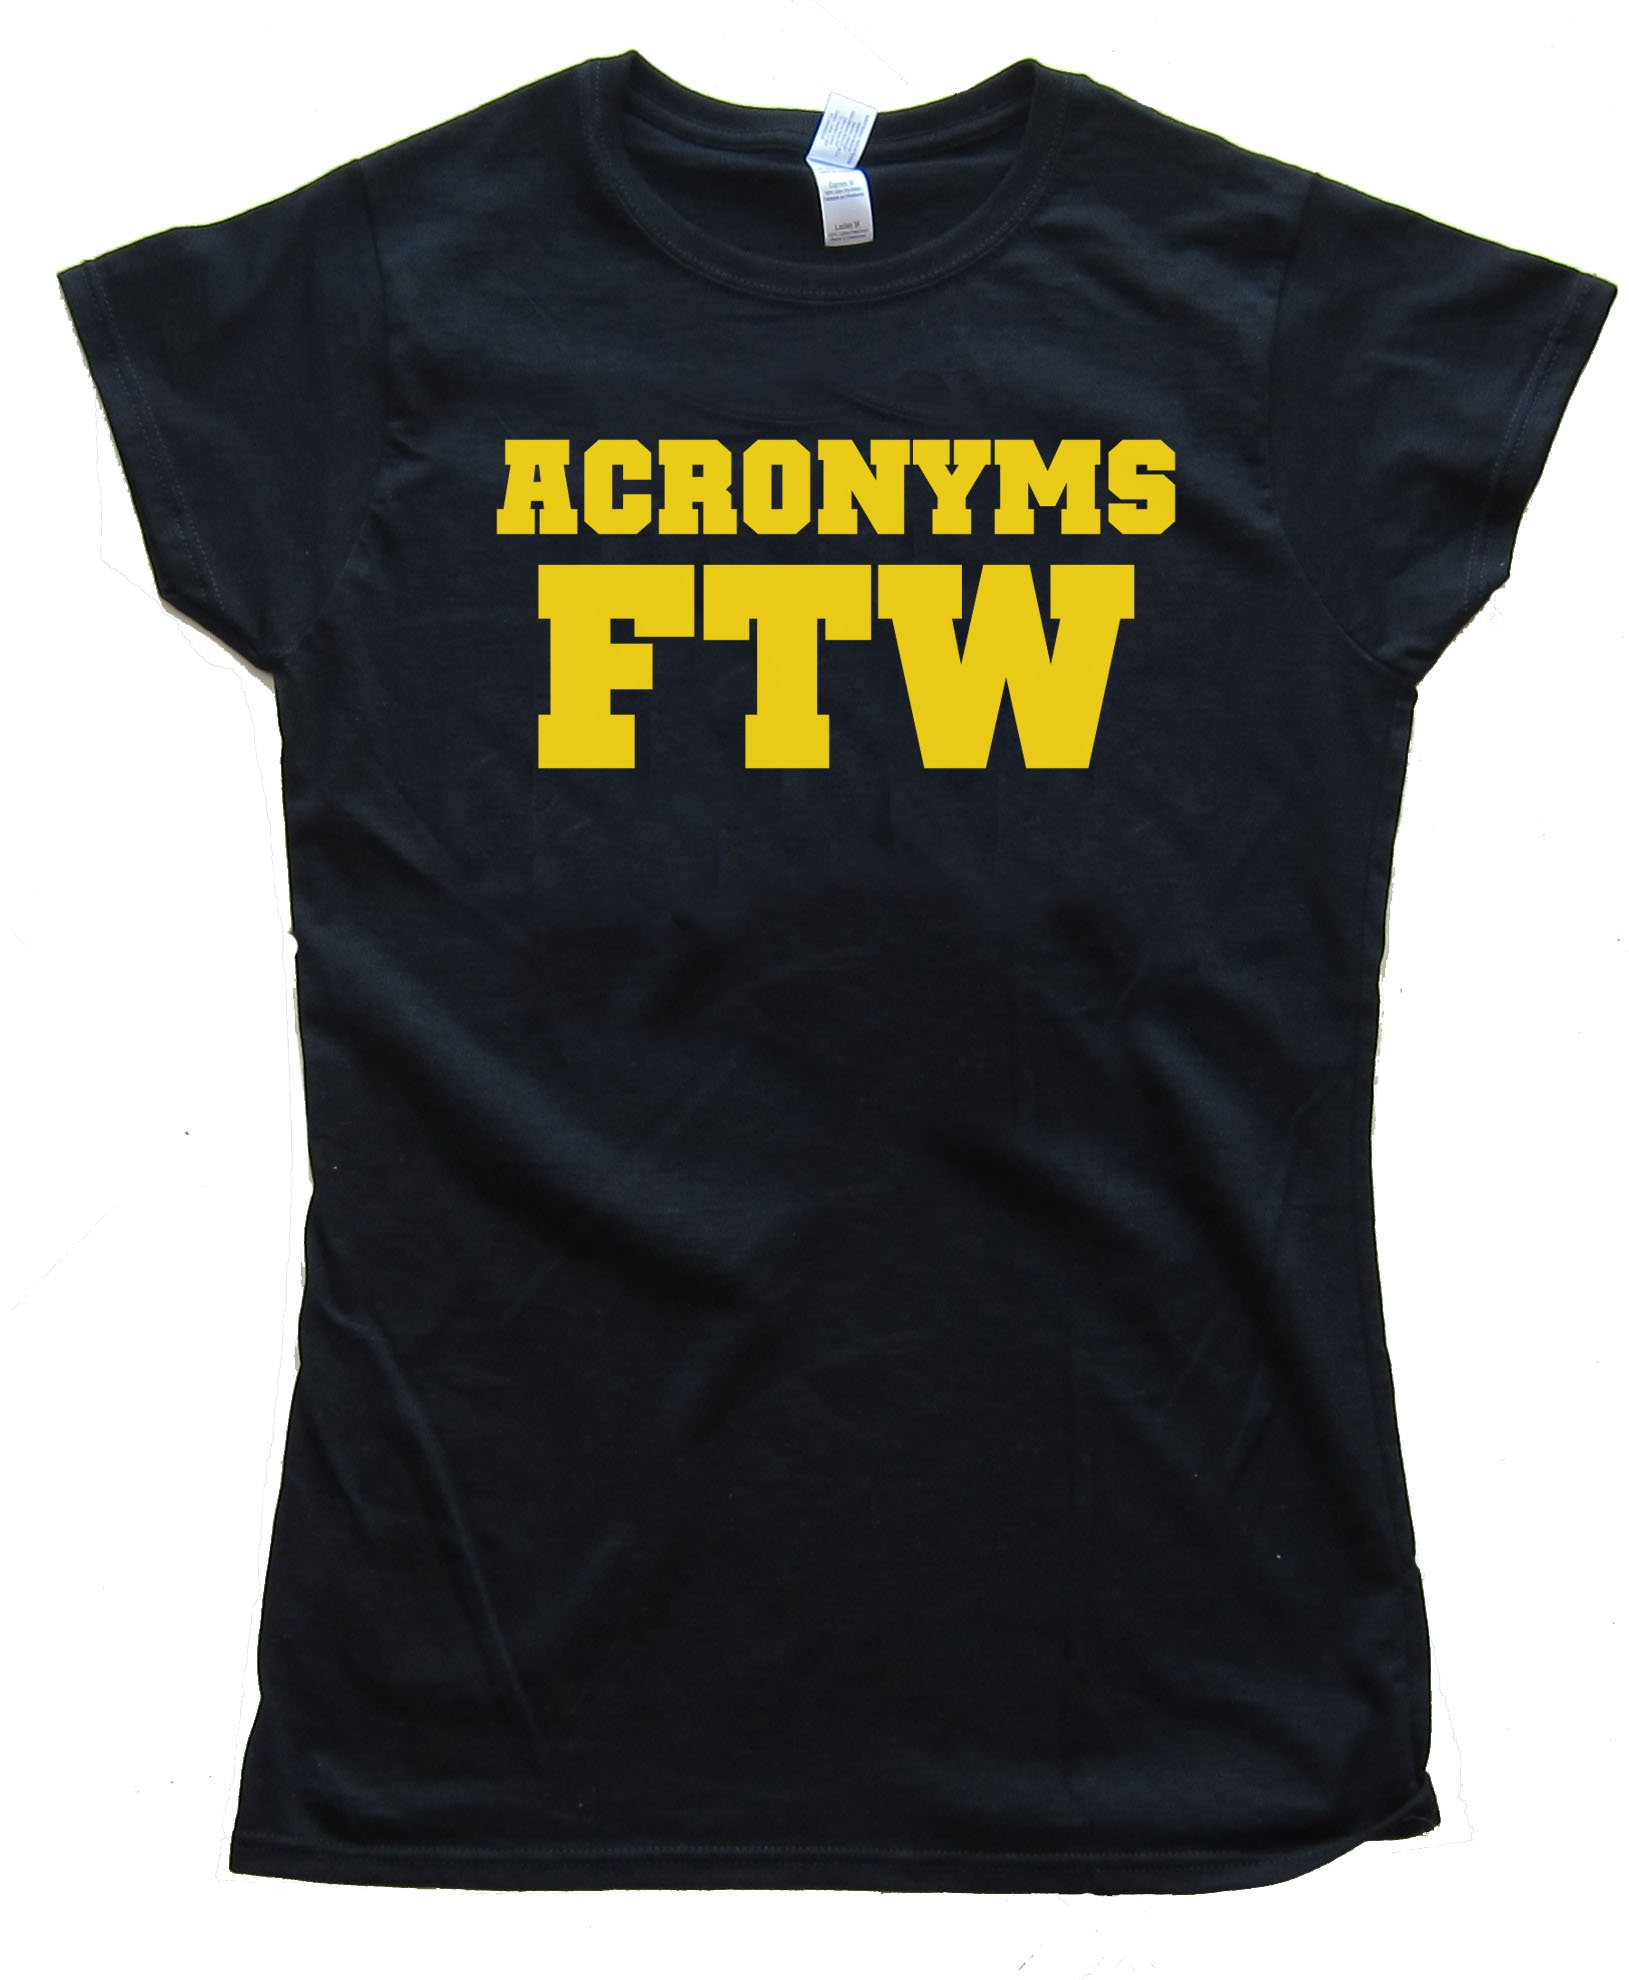 Womens Acronyms Ftw - For The Win - Tee Shirt